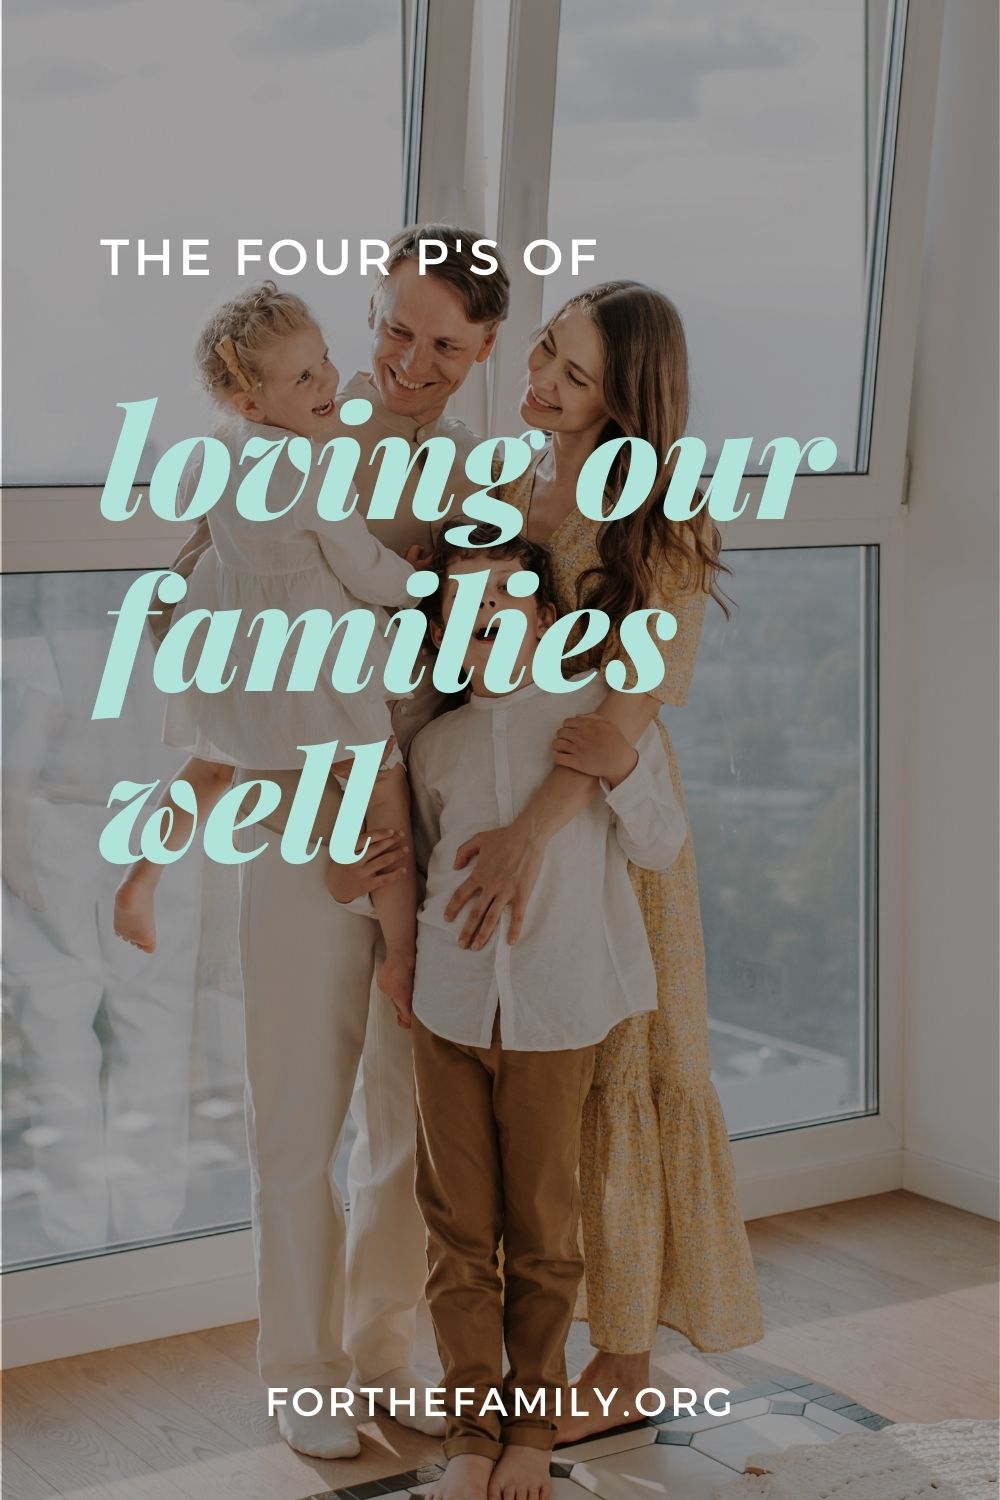 The Four P’s of Loving Our Families Well